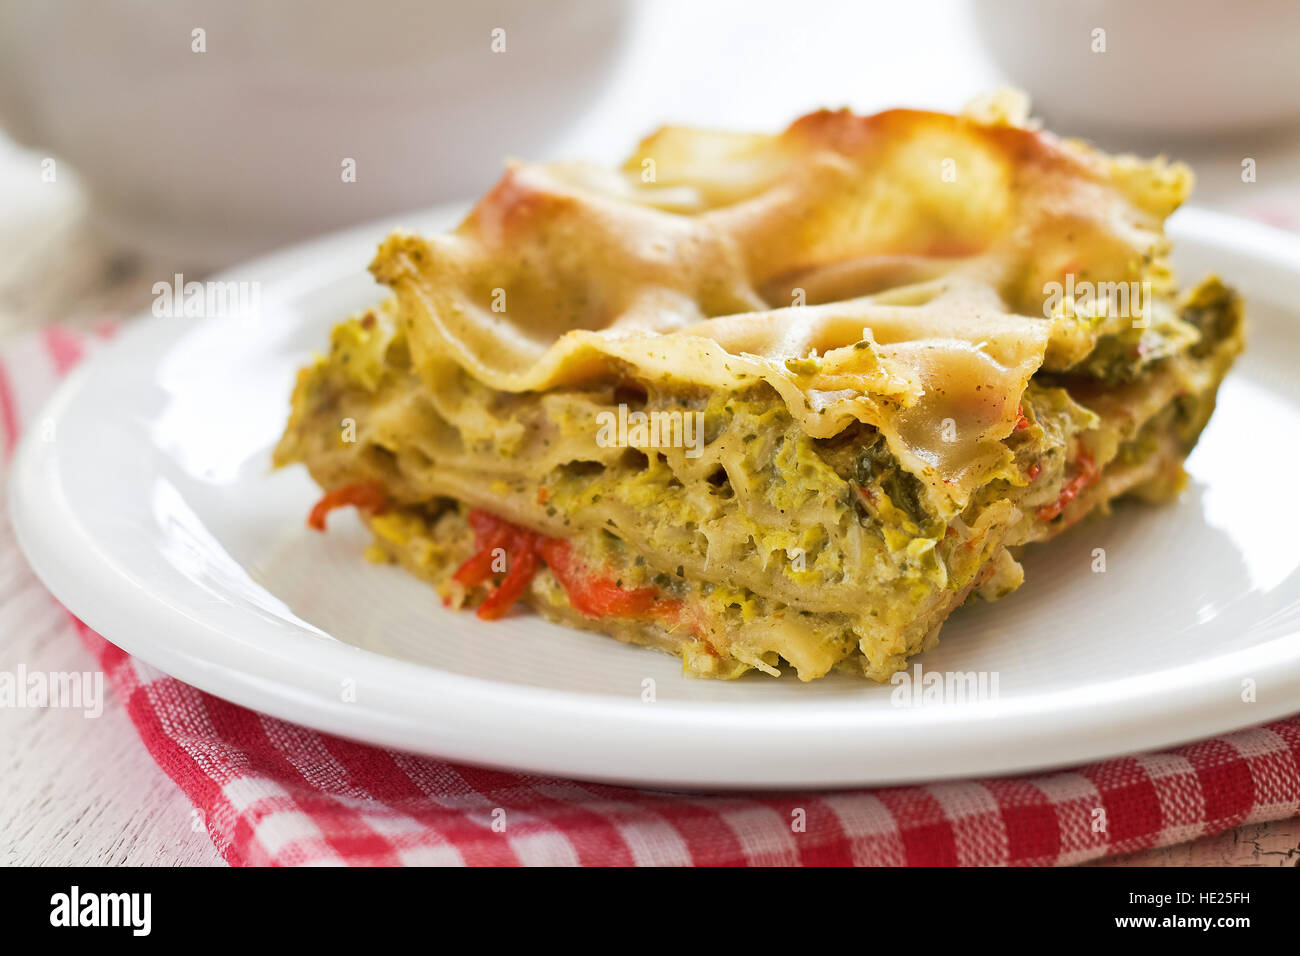 Vegan lasagna with savoy cabbage, tofu and red bell pepper served on white plate Stock Photo